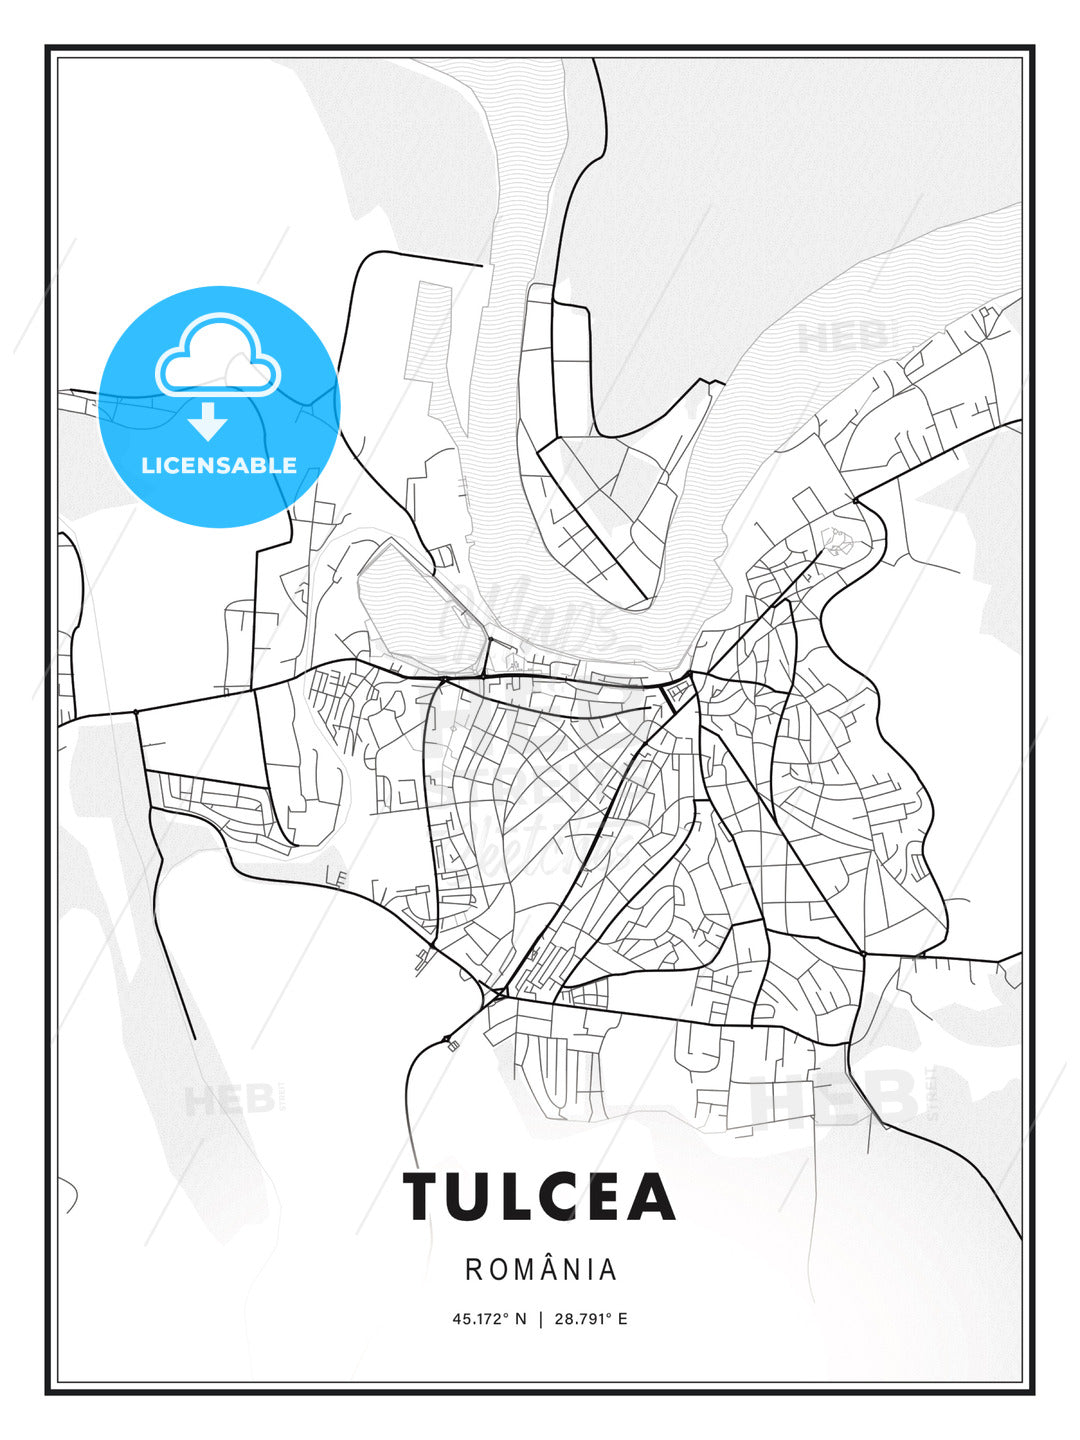 Tulcea, Romania, Modern Print Template in Various Formats - HEBSTREITS Sketches